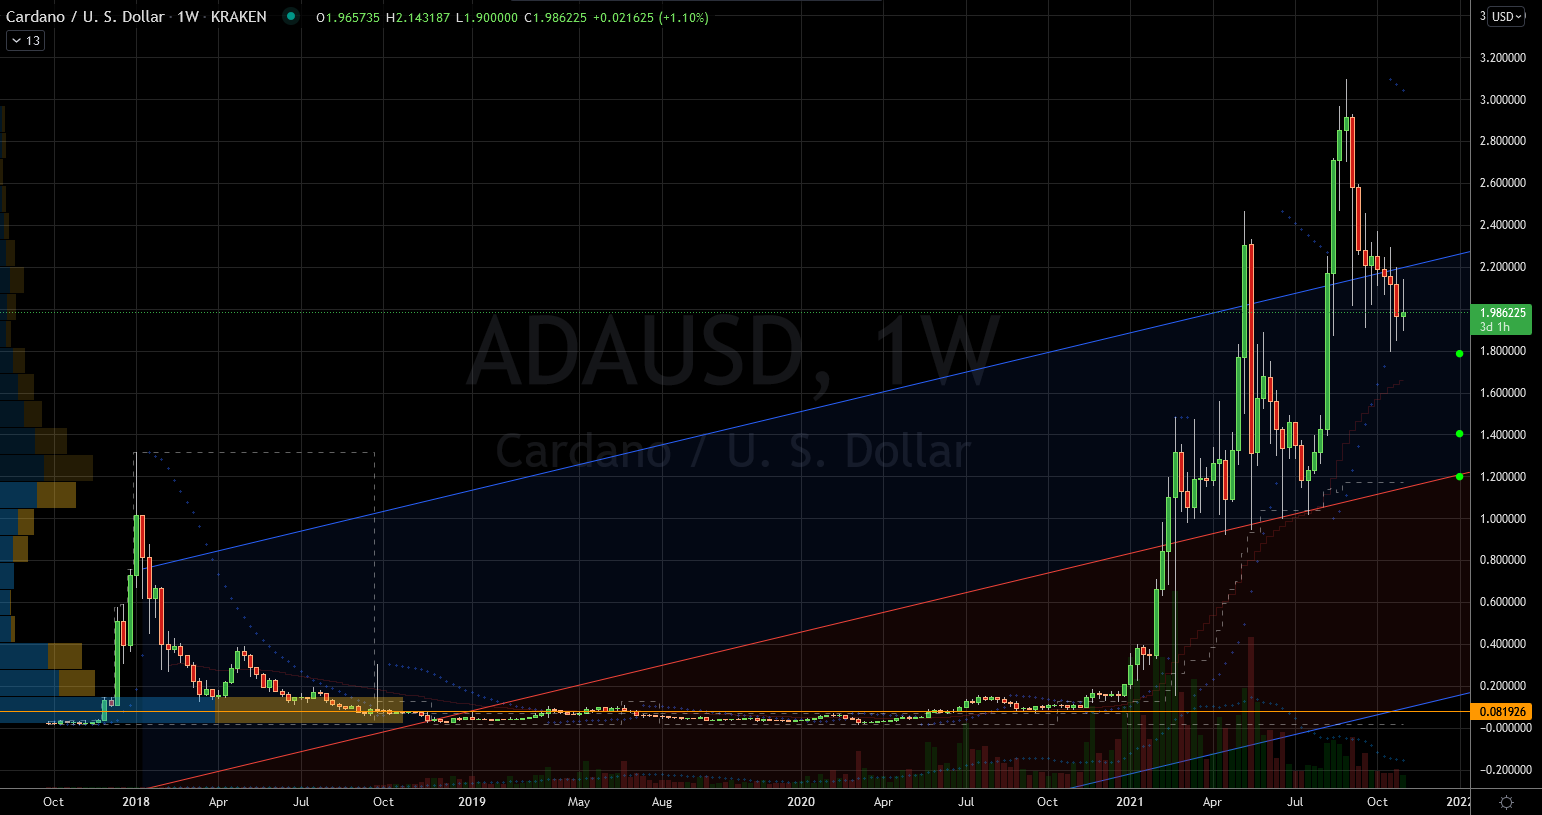 Cardano (ADA-USD) Stock Chart Showing Tremendous Growth